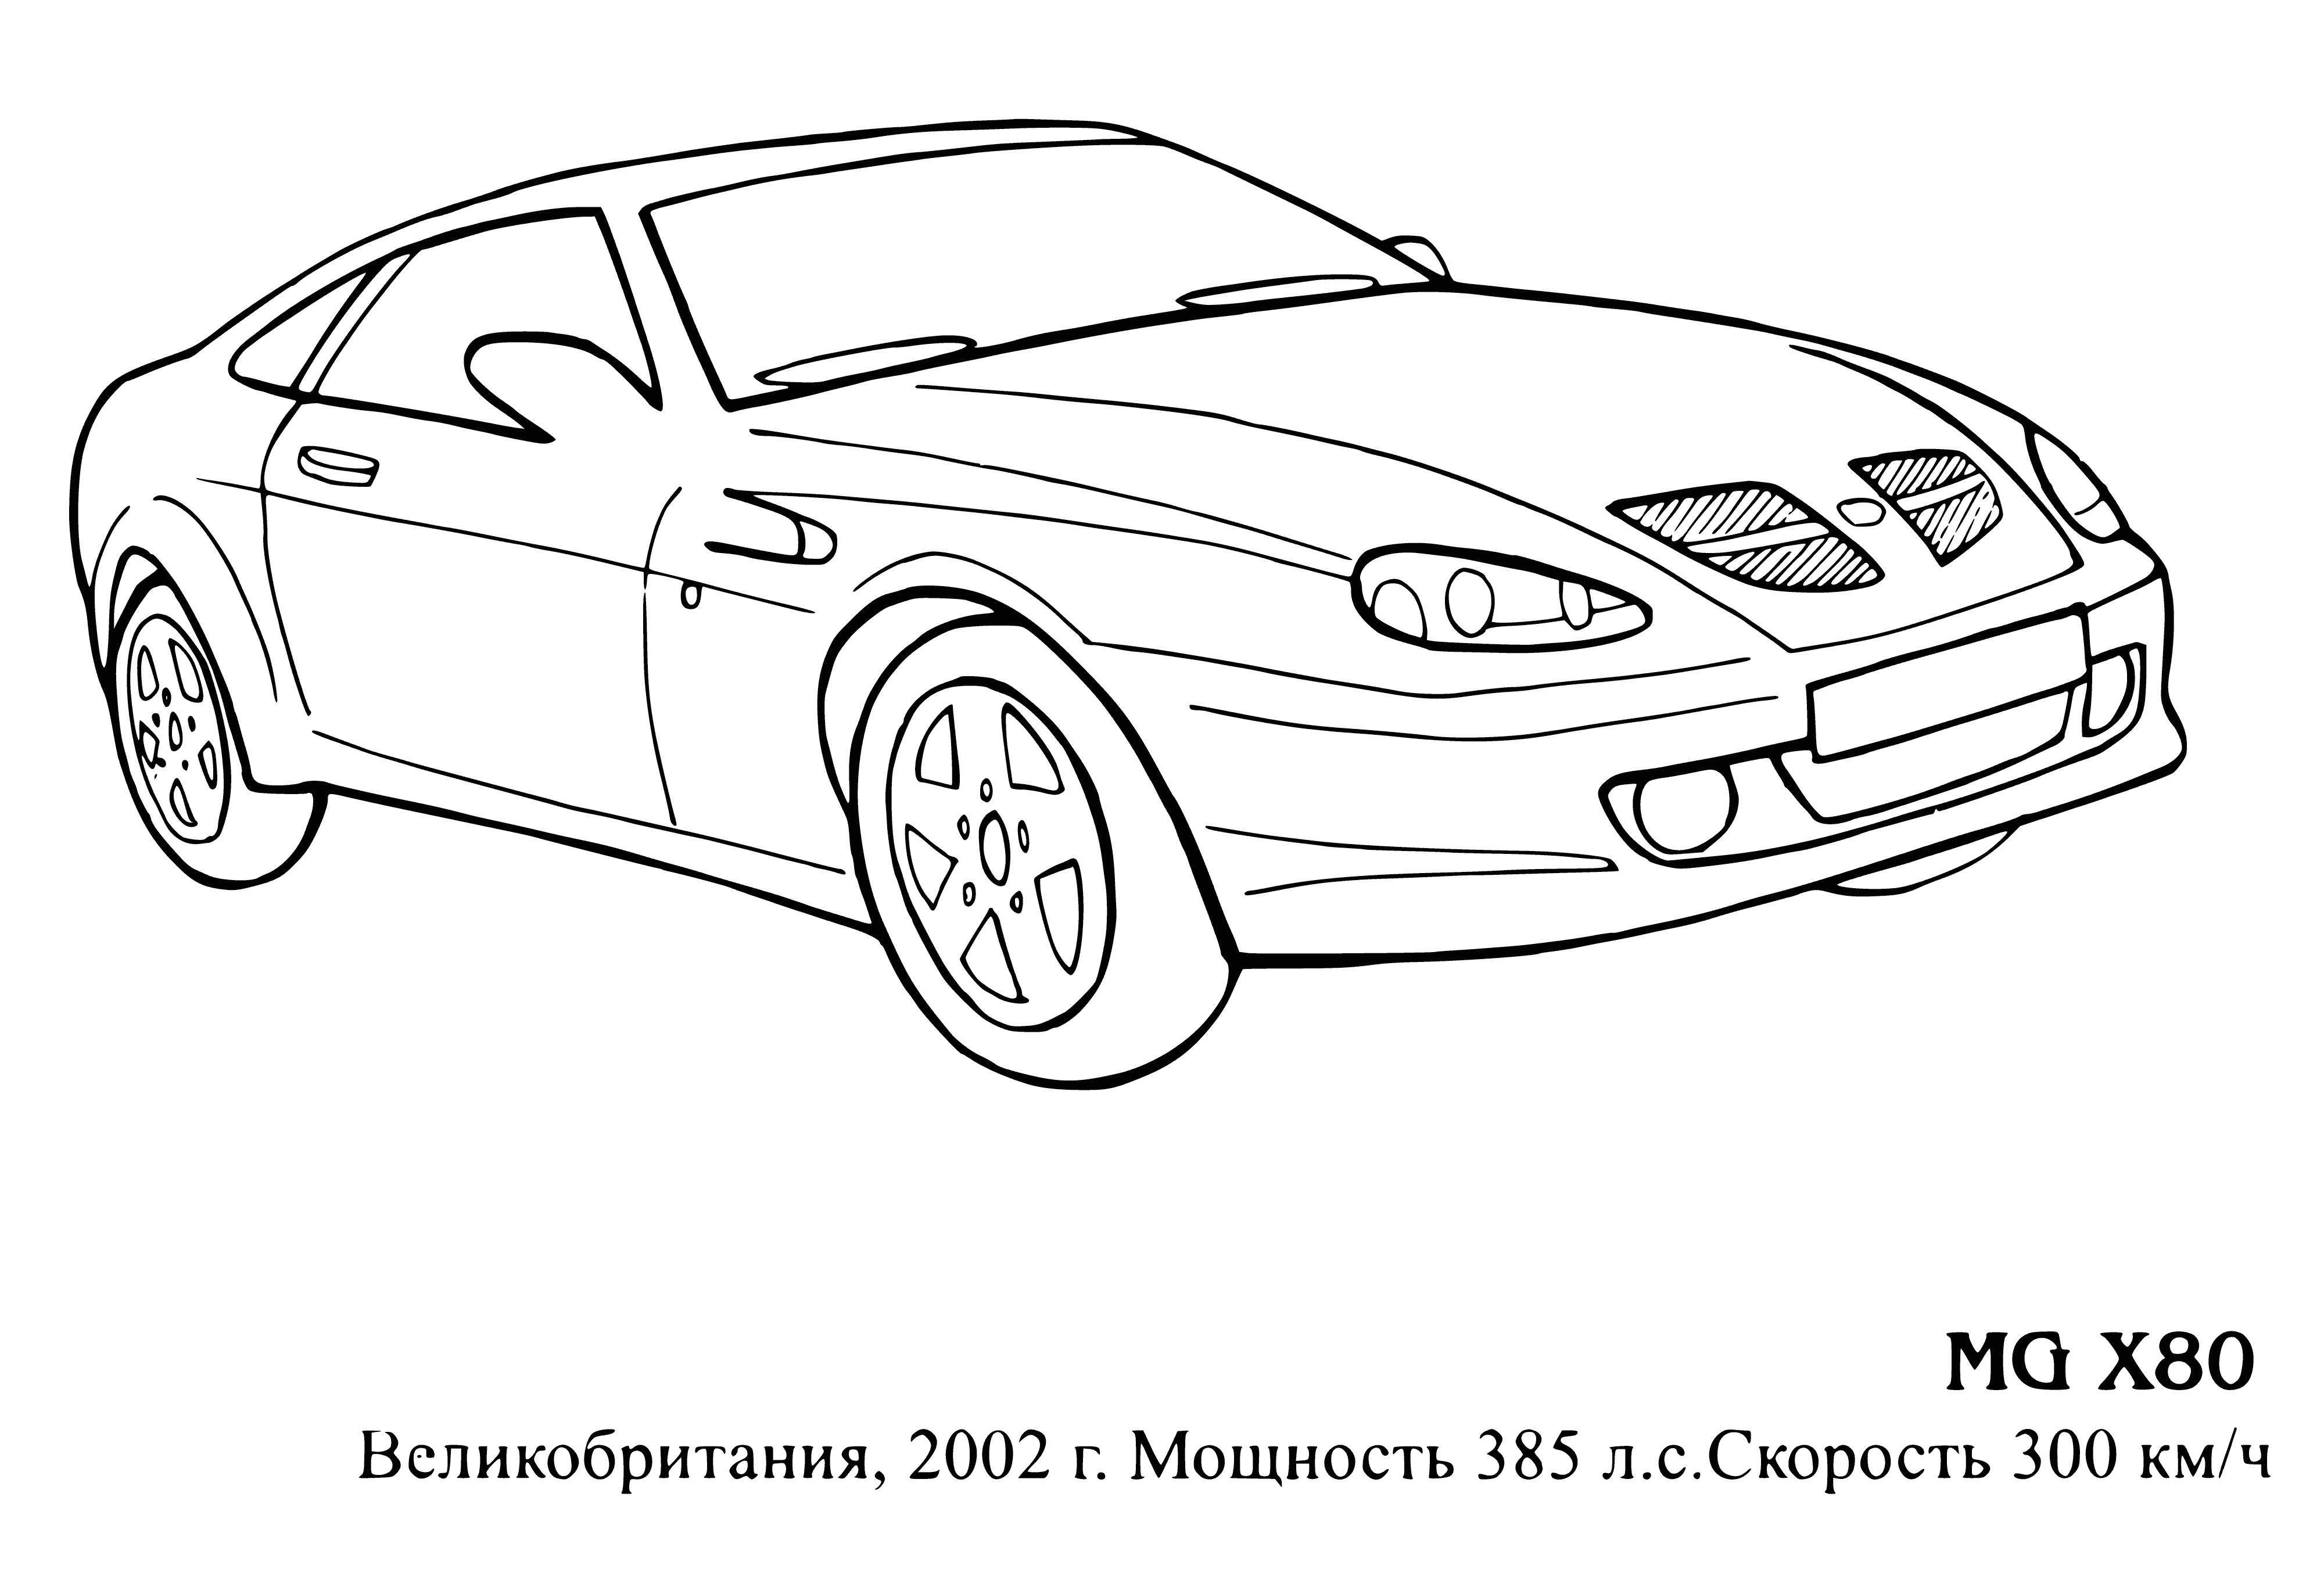 MG X80 coloring page